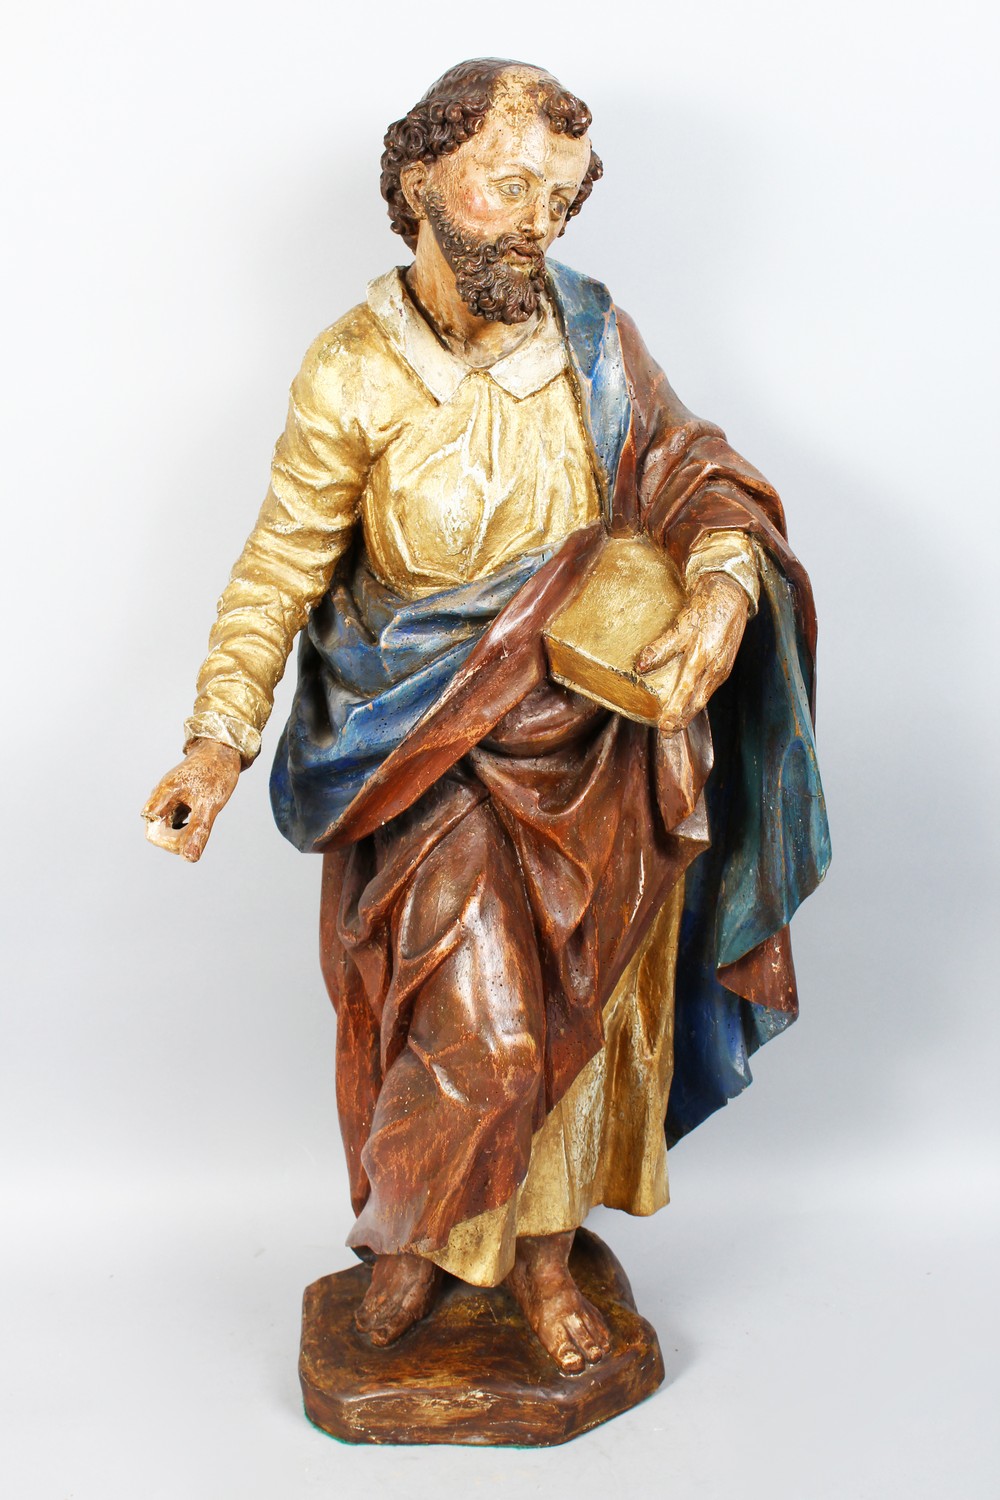 AN 18TH CENTURY DUTCH CARVED WOOD AND PAINTED STANDING FIGURE OF A SAINT holding a book. 34ins